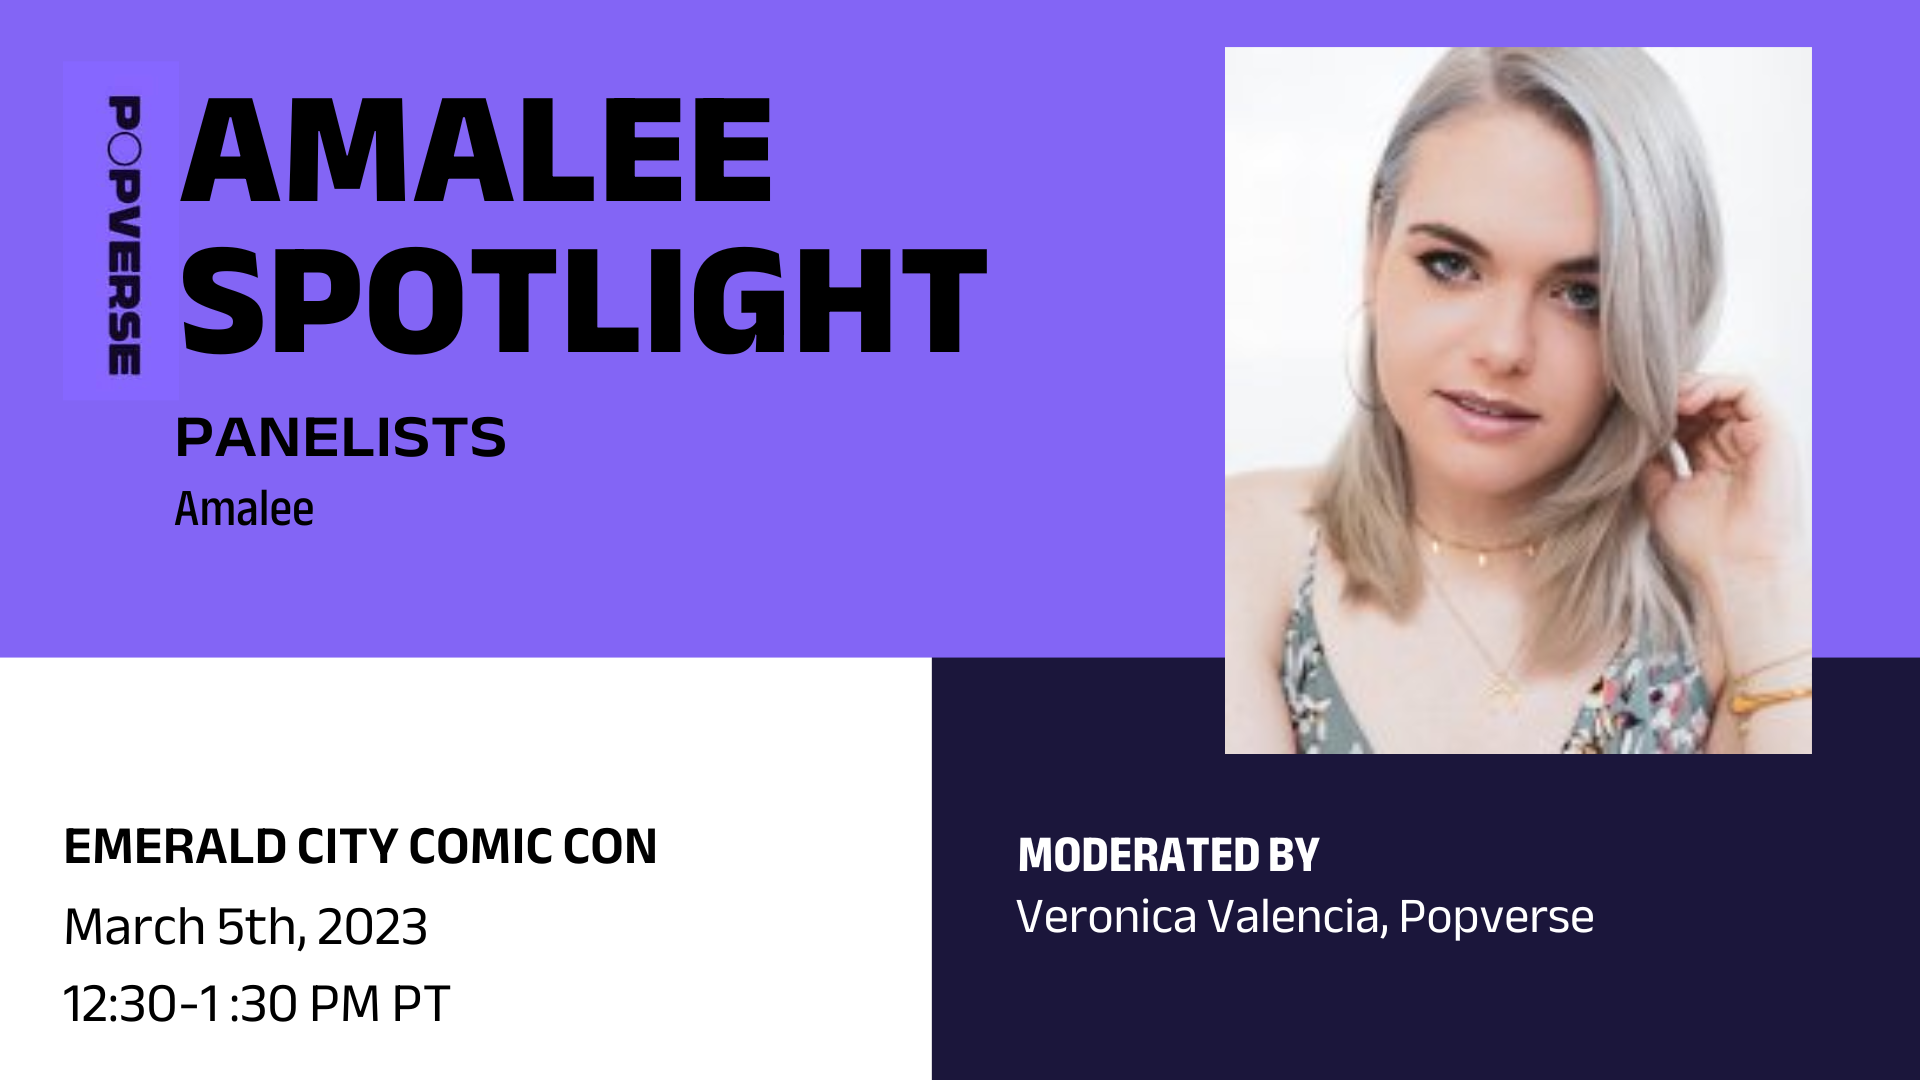 Watch the Amalee Spotlight panel from ECCC '23